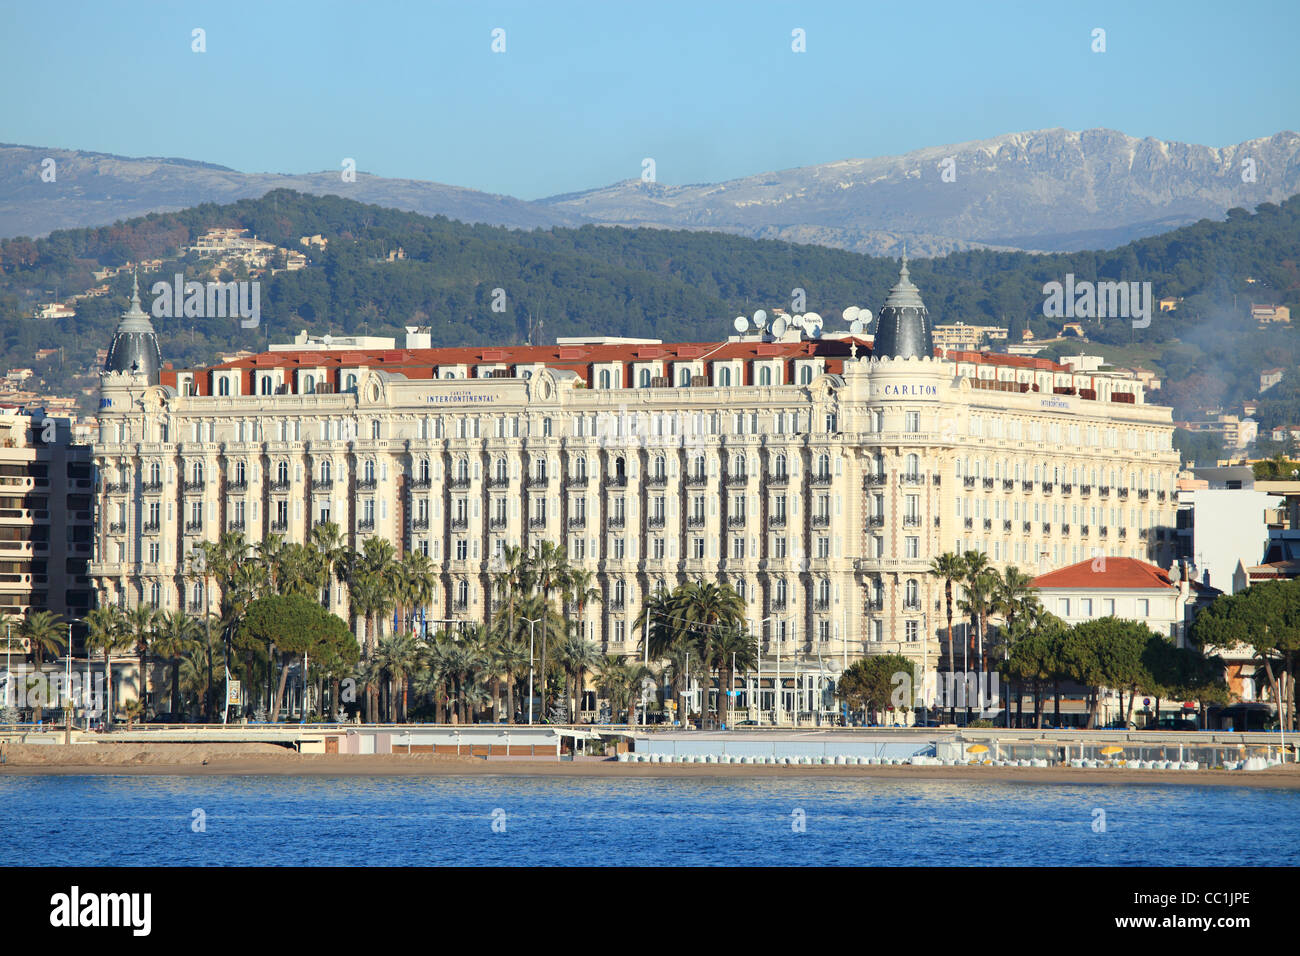 The city of Cannes with the Carlton Palace hotel Stock Photo